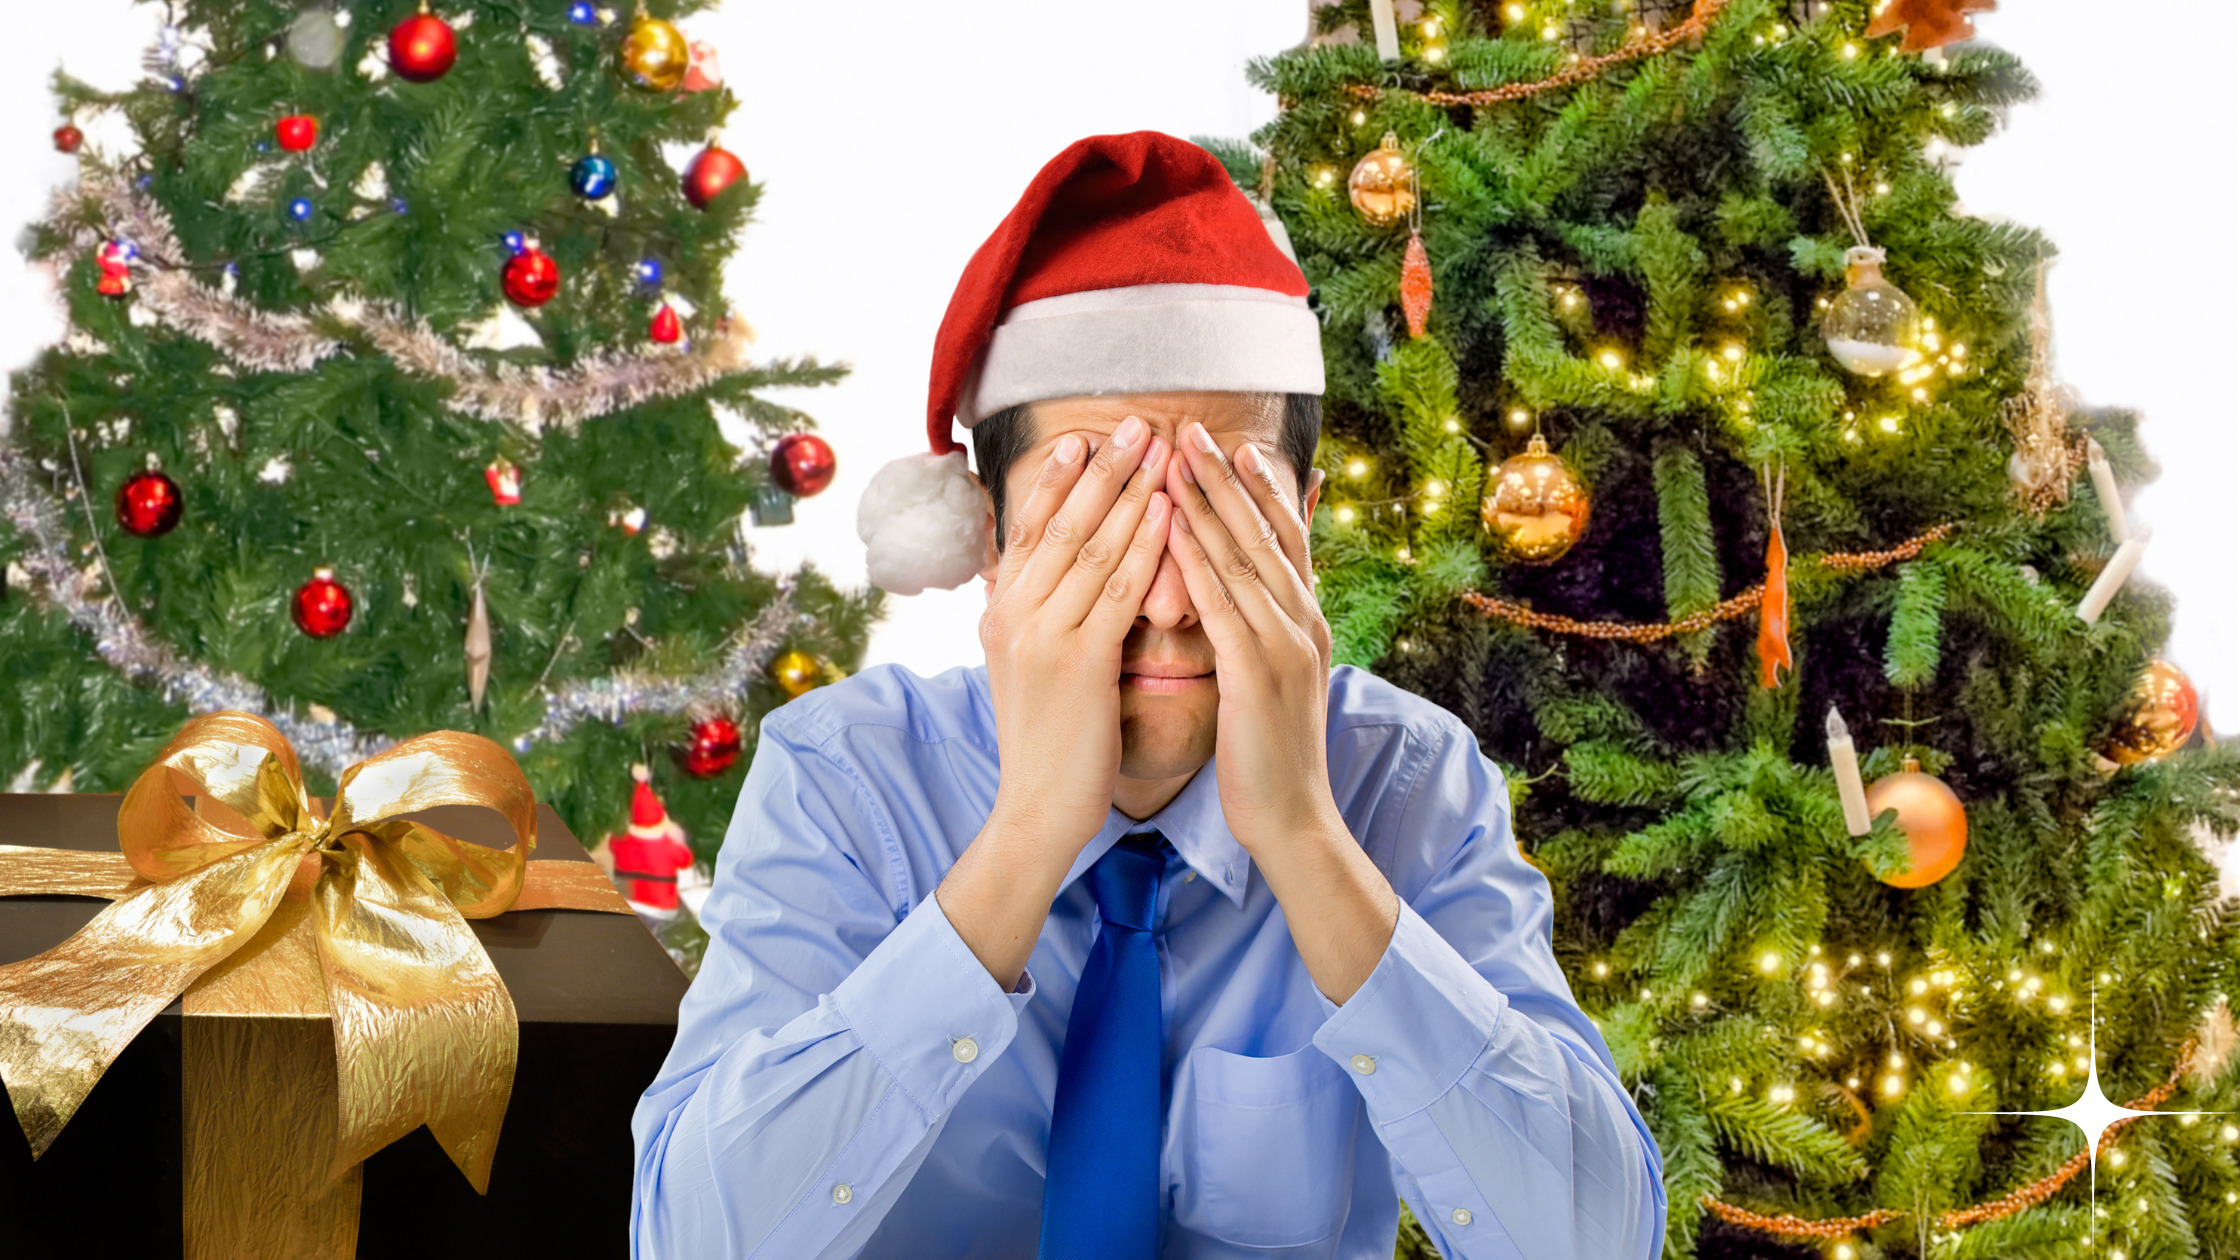 Ways To Enjoy The Holidays When You Find The Holidays Stressful.